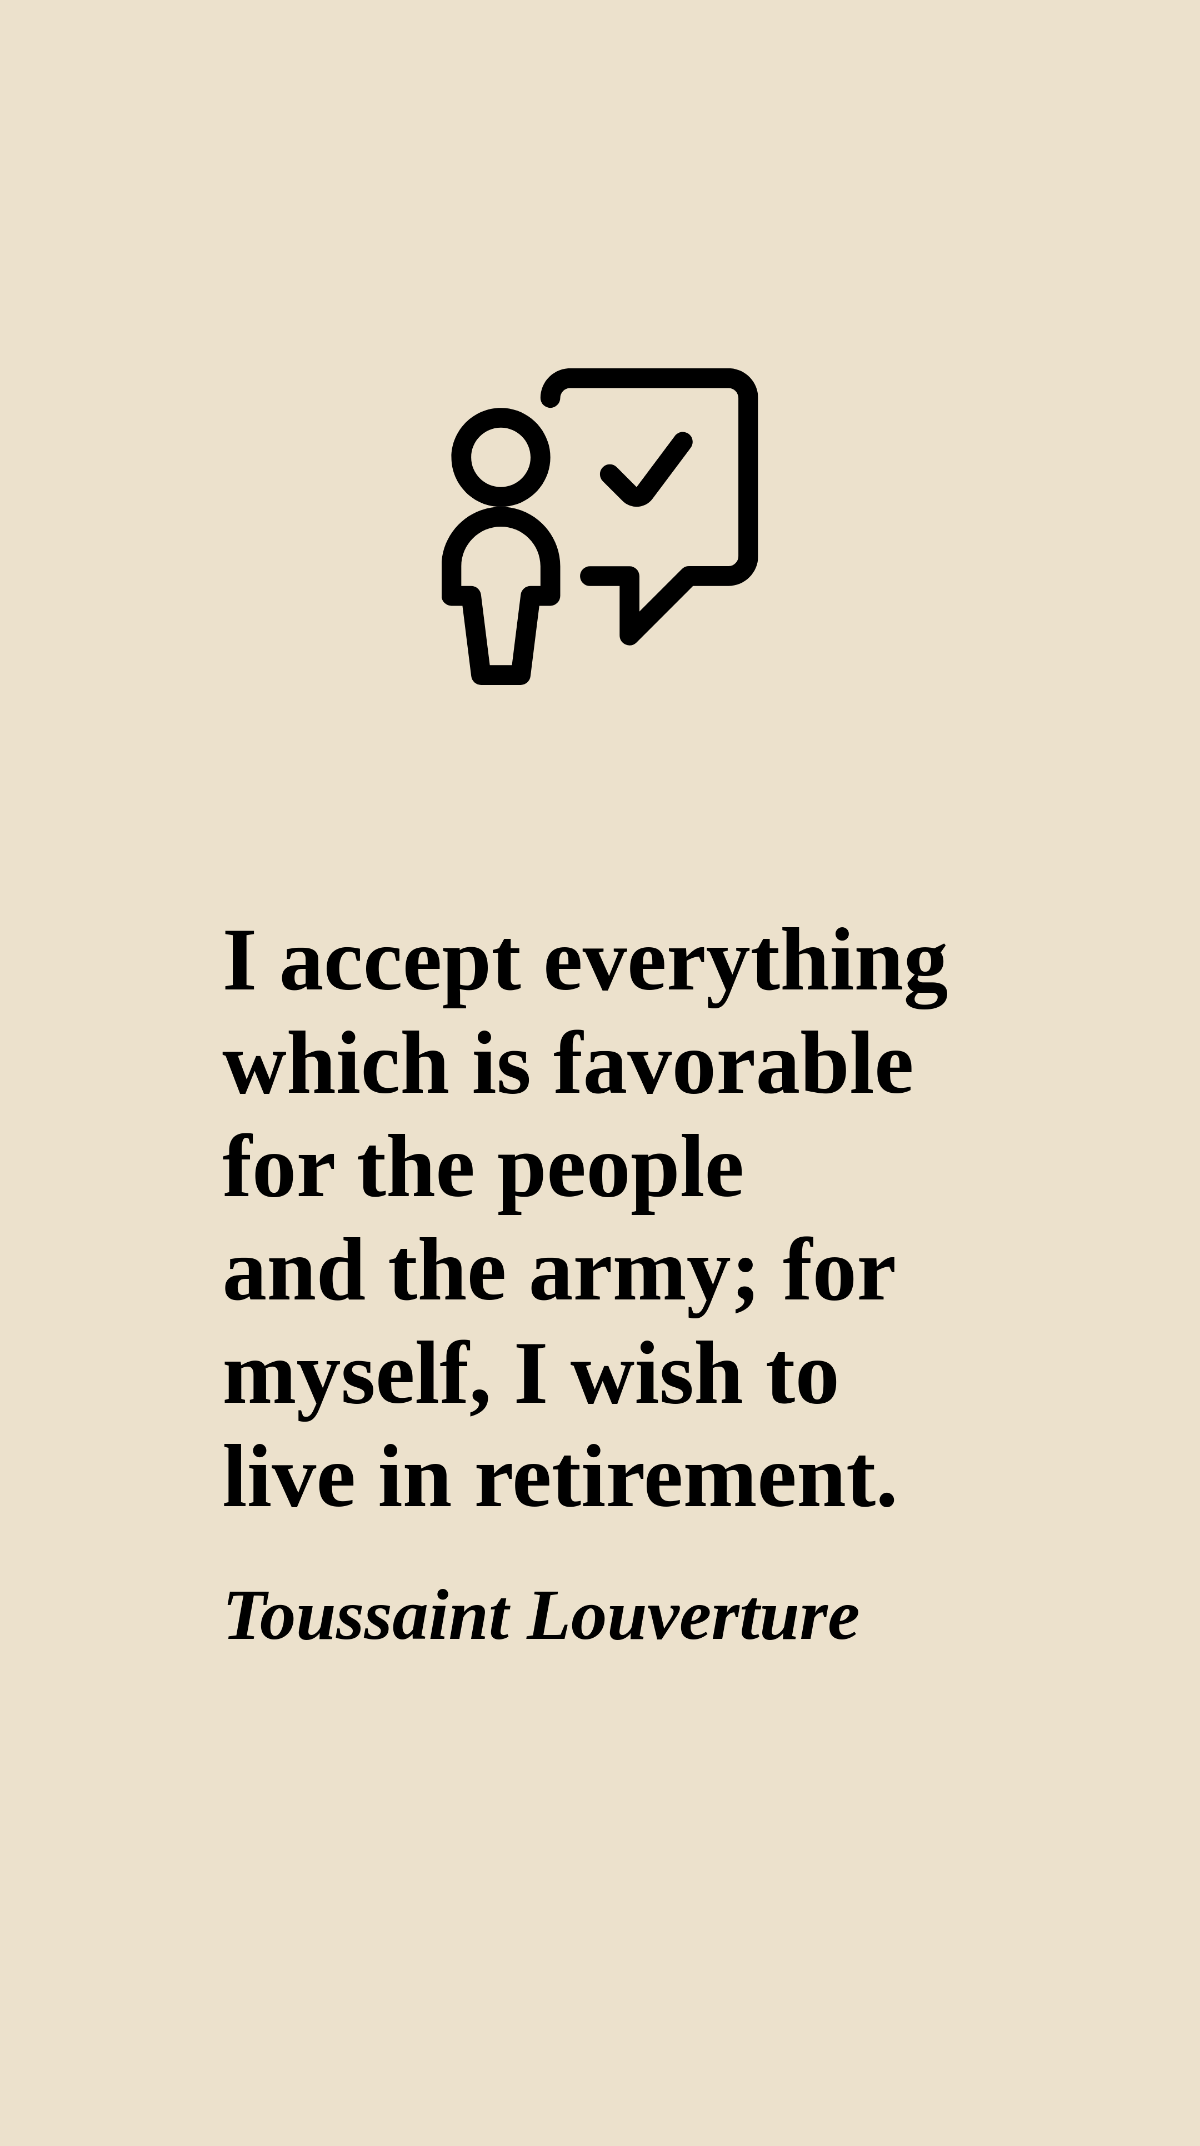 Toussaint Louverture - I accept everything which is favorable for the people and the army; for myself, I wish to live in retirement. Template